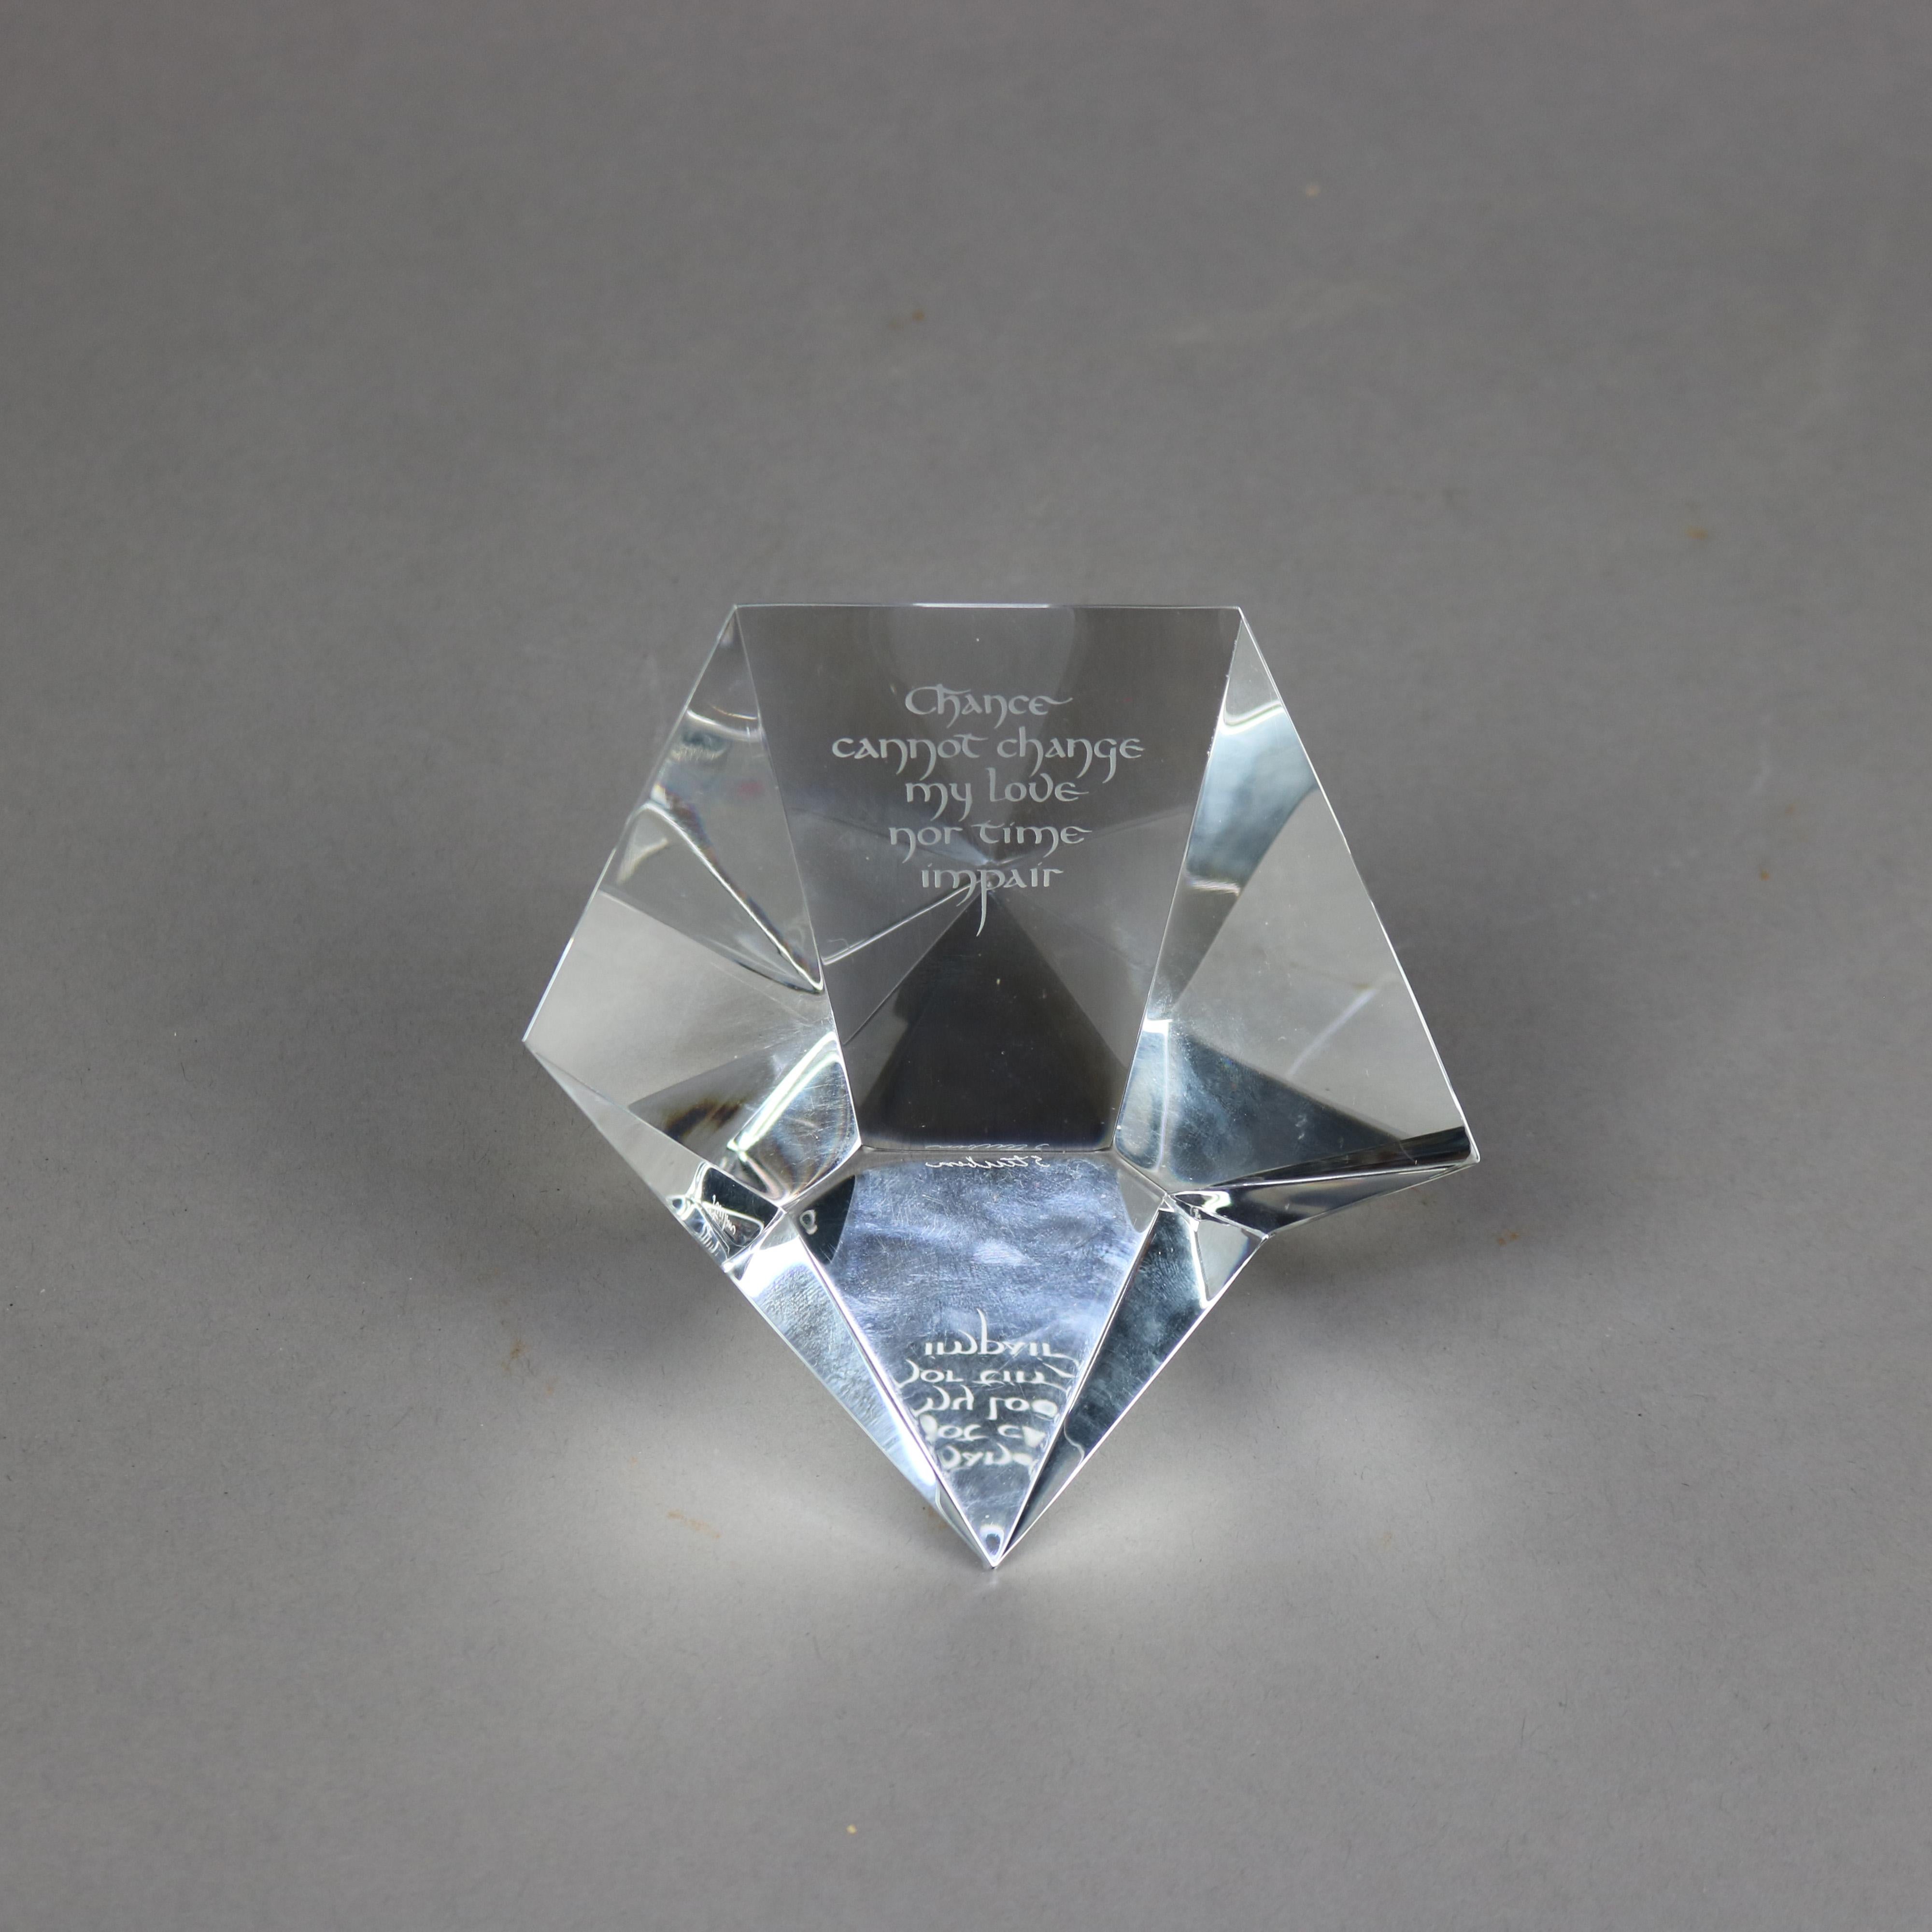 A desk sculpture paperweight by Steuben offers colorless art glass construction in diamond prism form with etched 